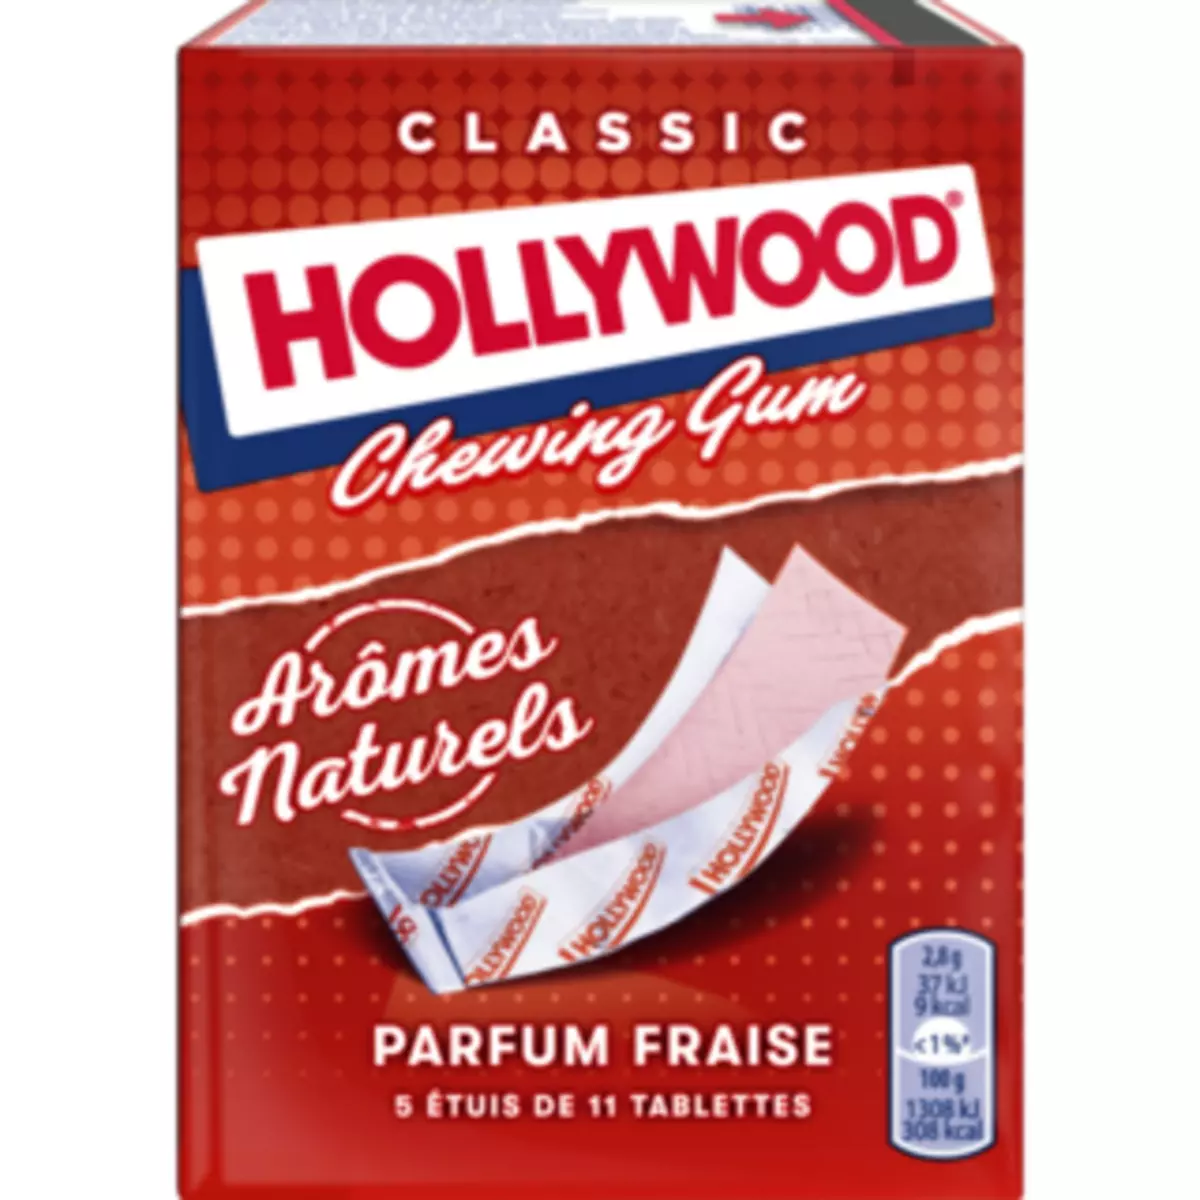 HOLLYWOOD Chewing-gums parfum fraise 11 tablettes 155g